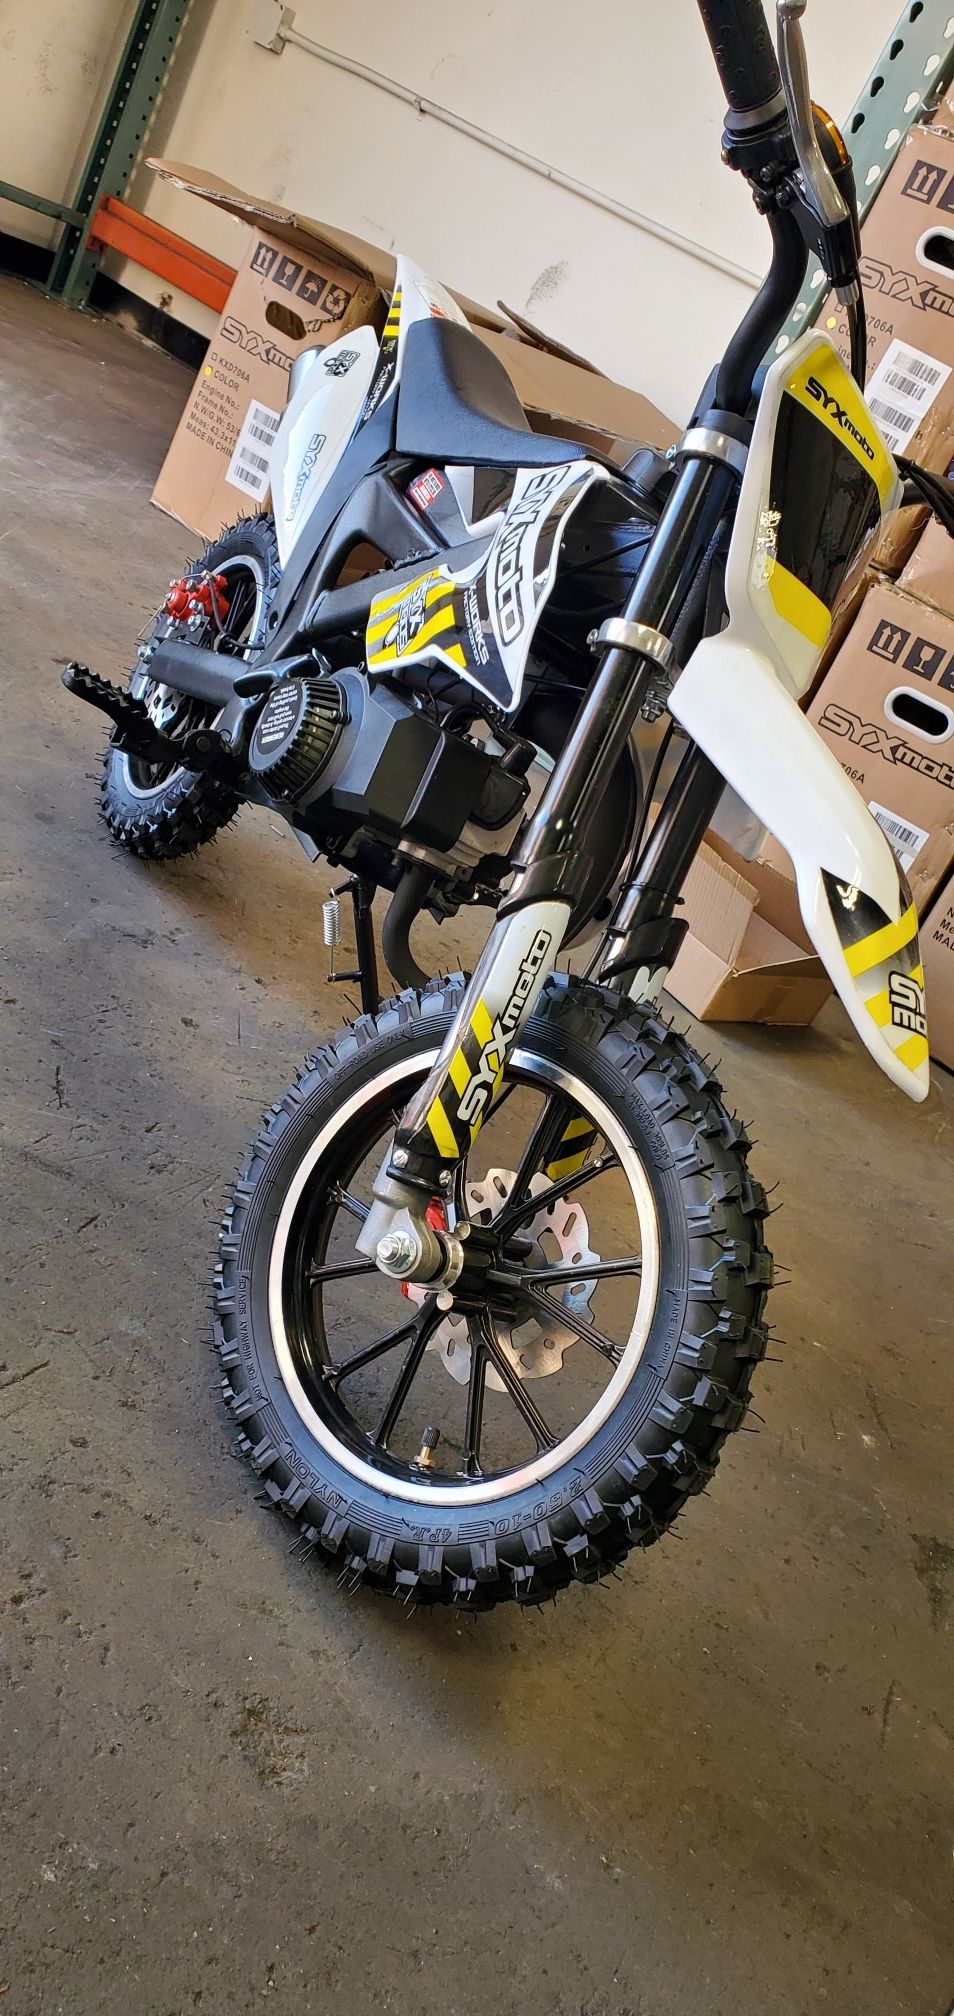 Gas Pit Bike Competition syx moto dirt bikes (New)